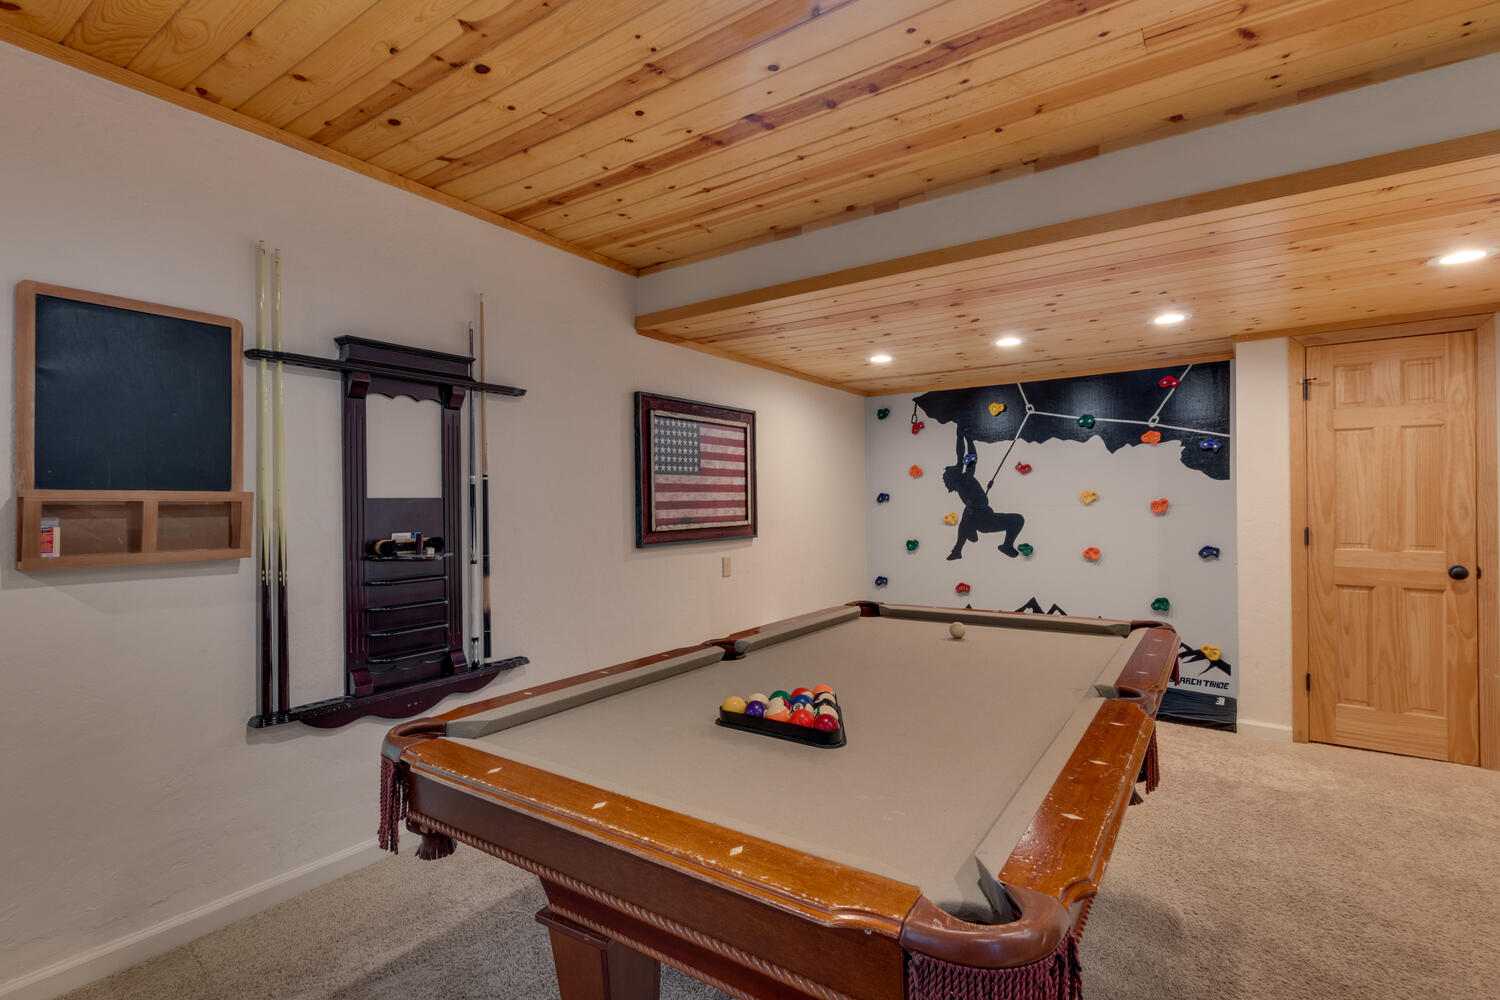 Recreation area with Pool table and Wall climbing for kids